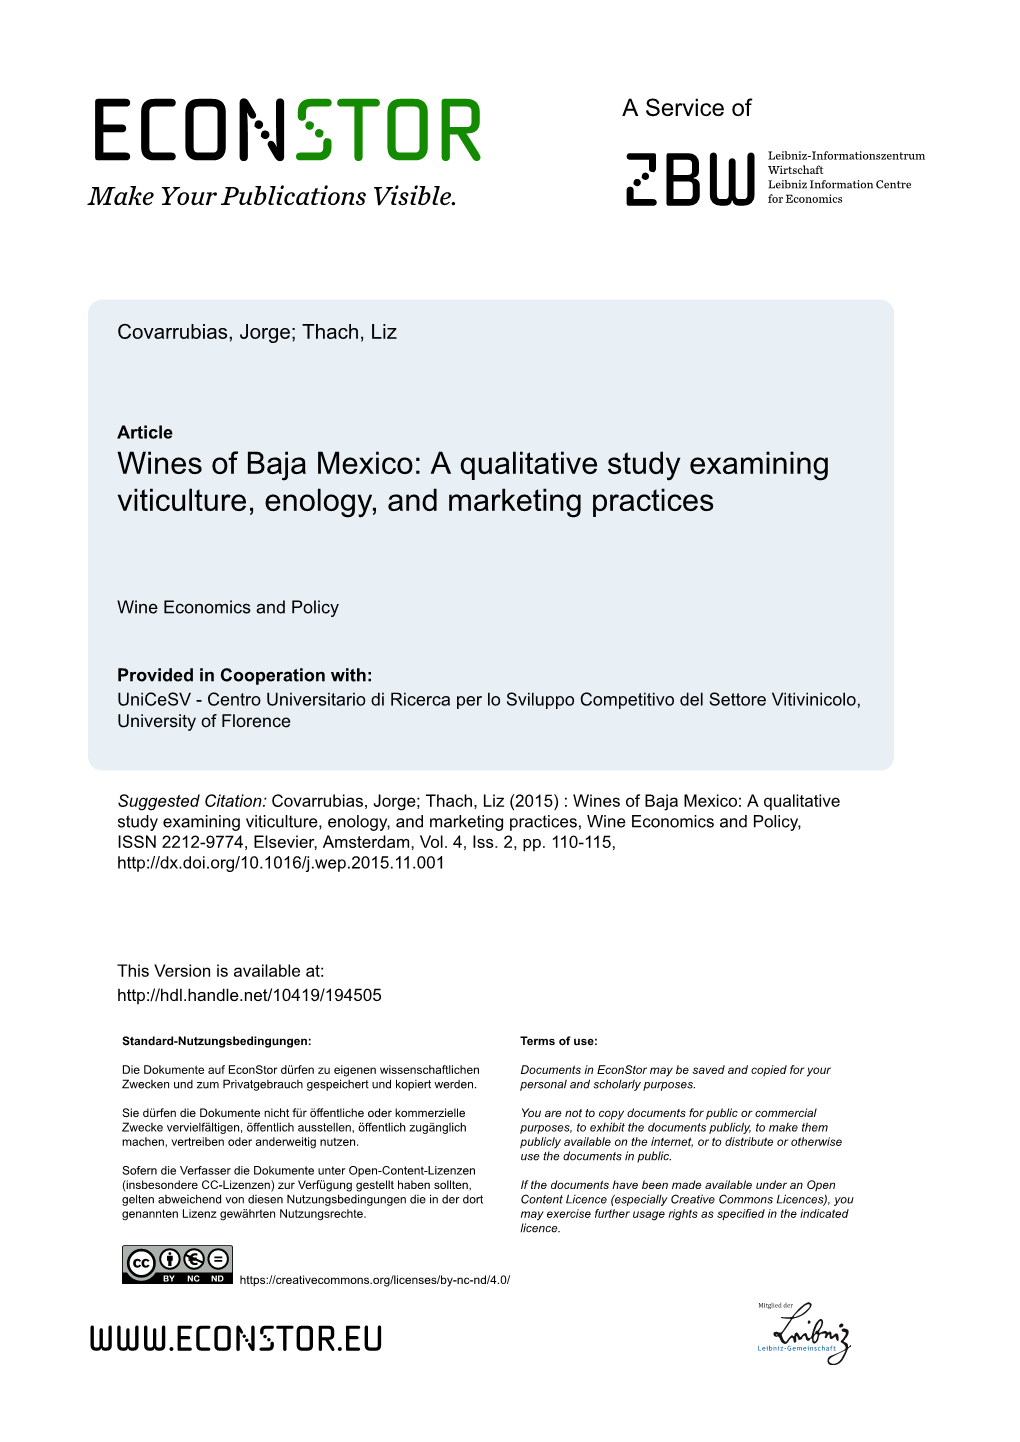 Wines of Baja Mexico: a Qualitative Study Examining Viticulture, Enology, and Marketing Practices